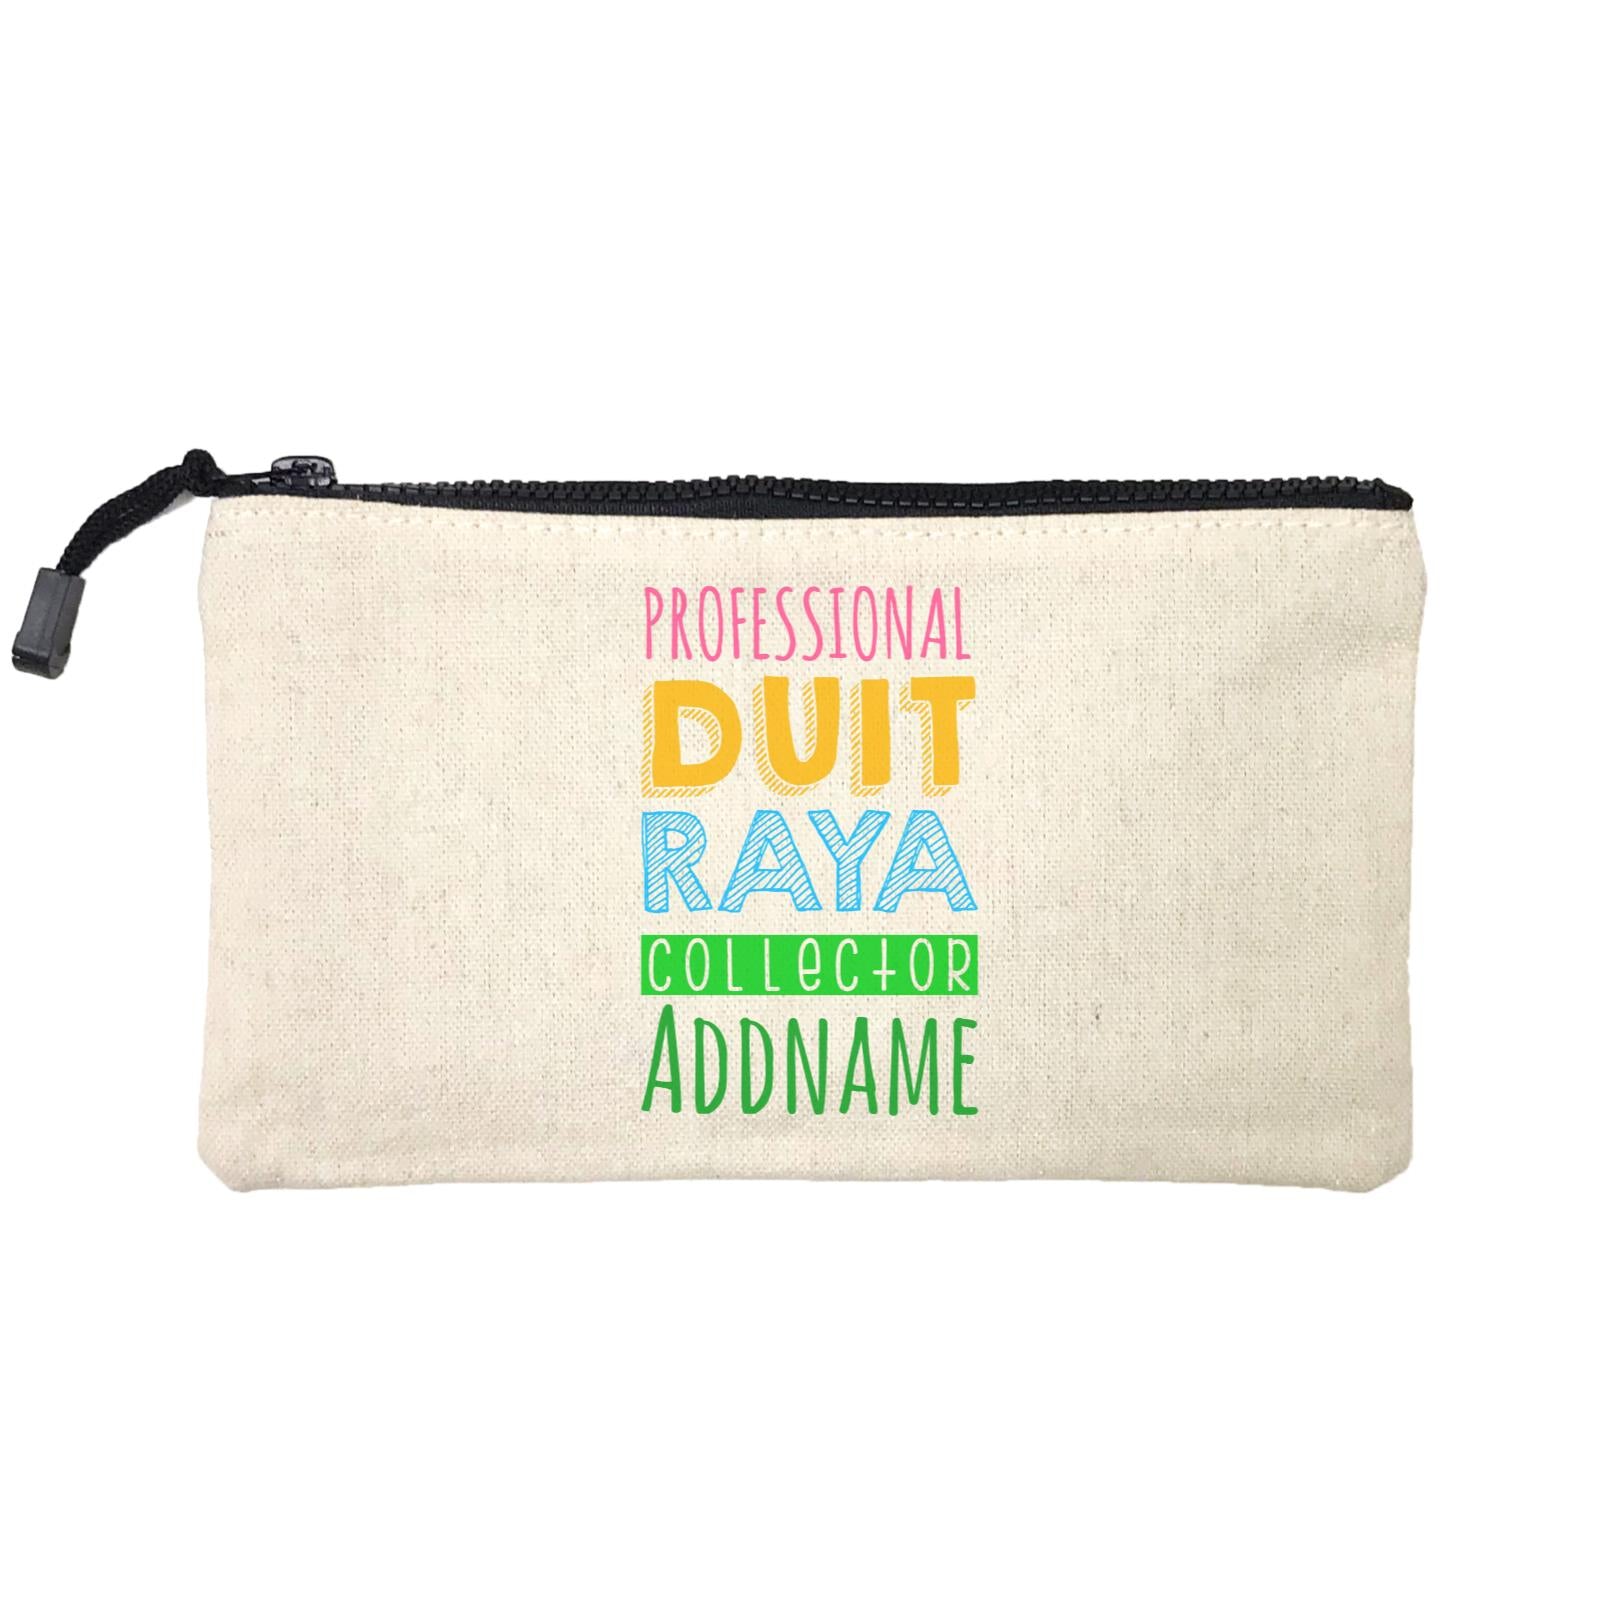 Professional Duit Raya Collector Addname Mini Accessories Stationery Pouch